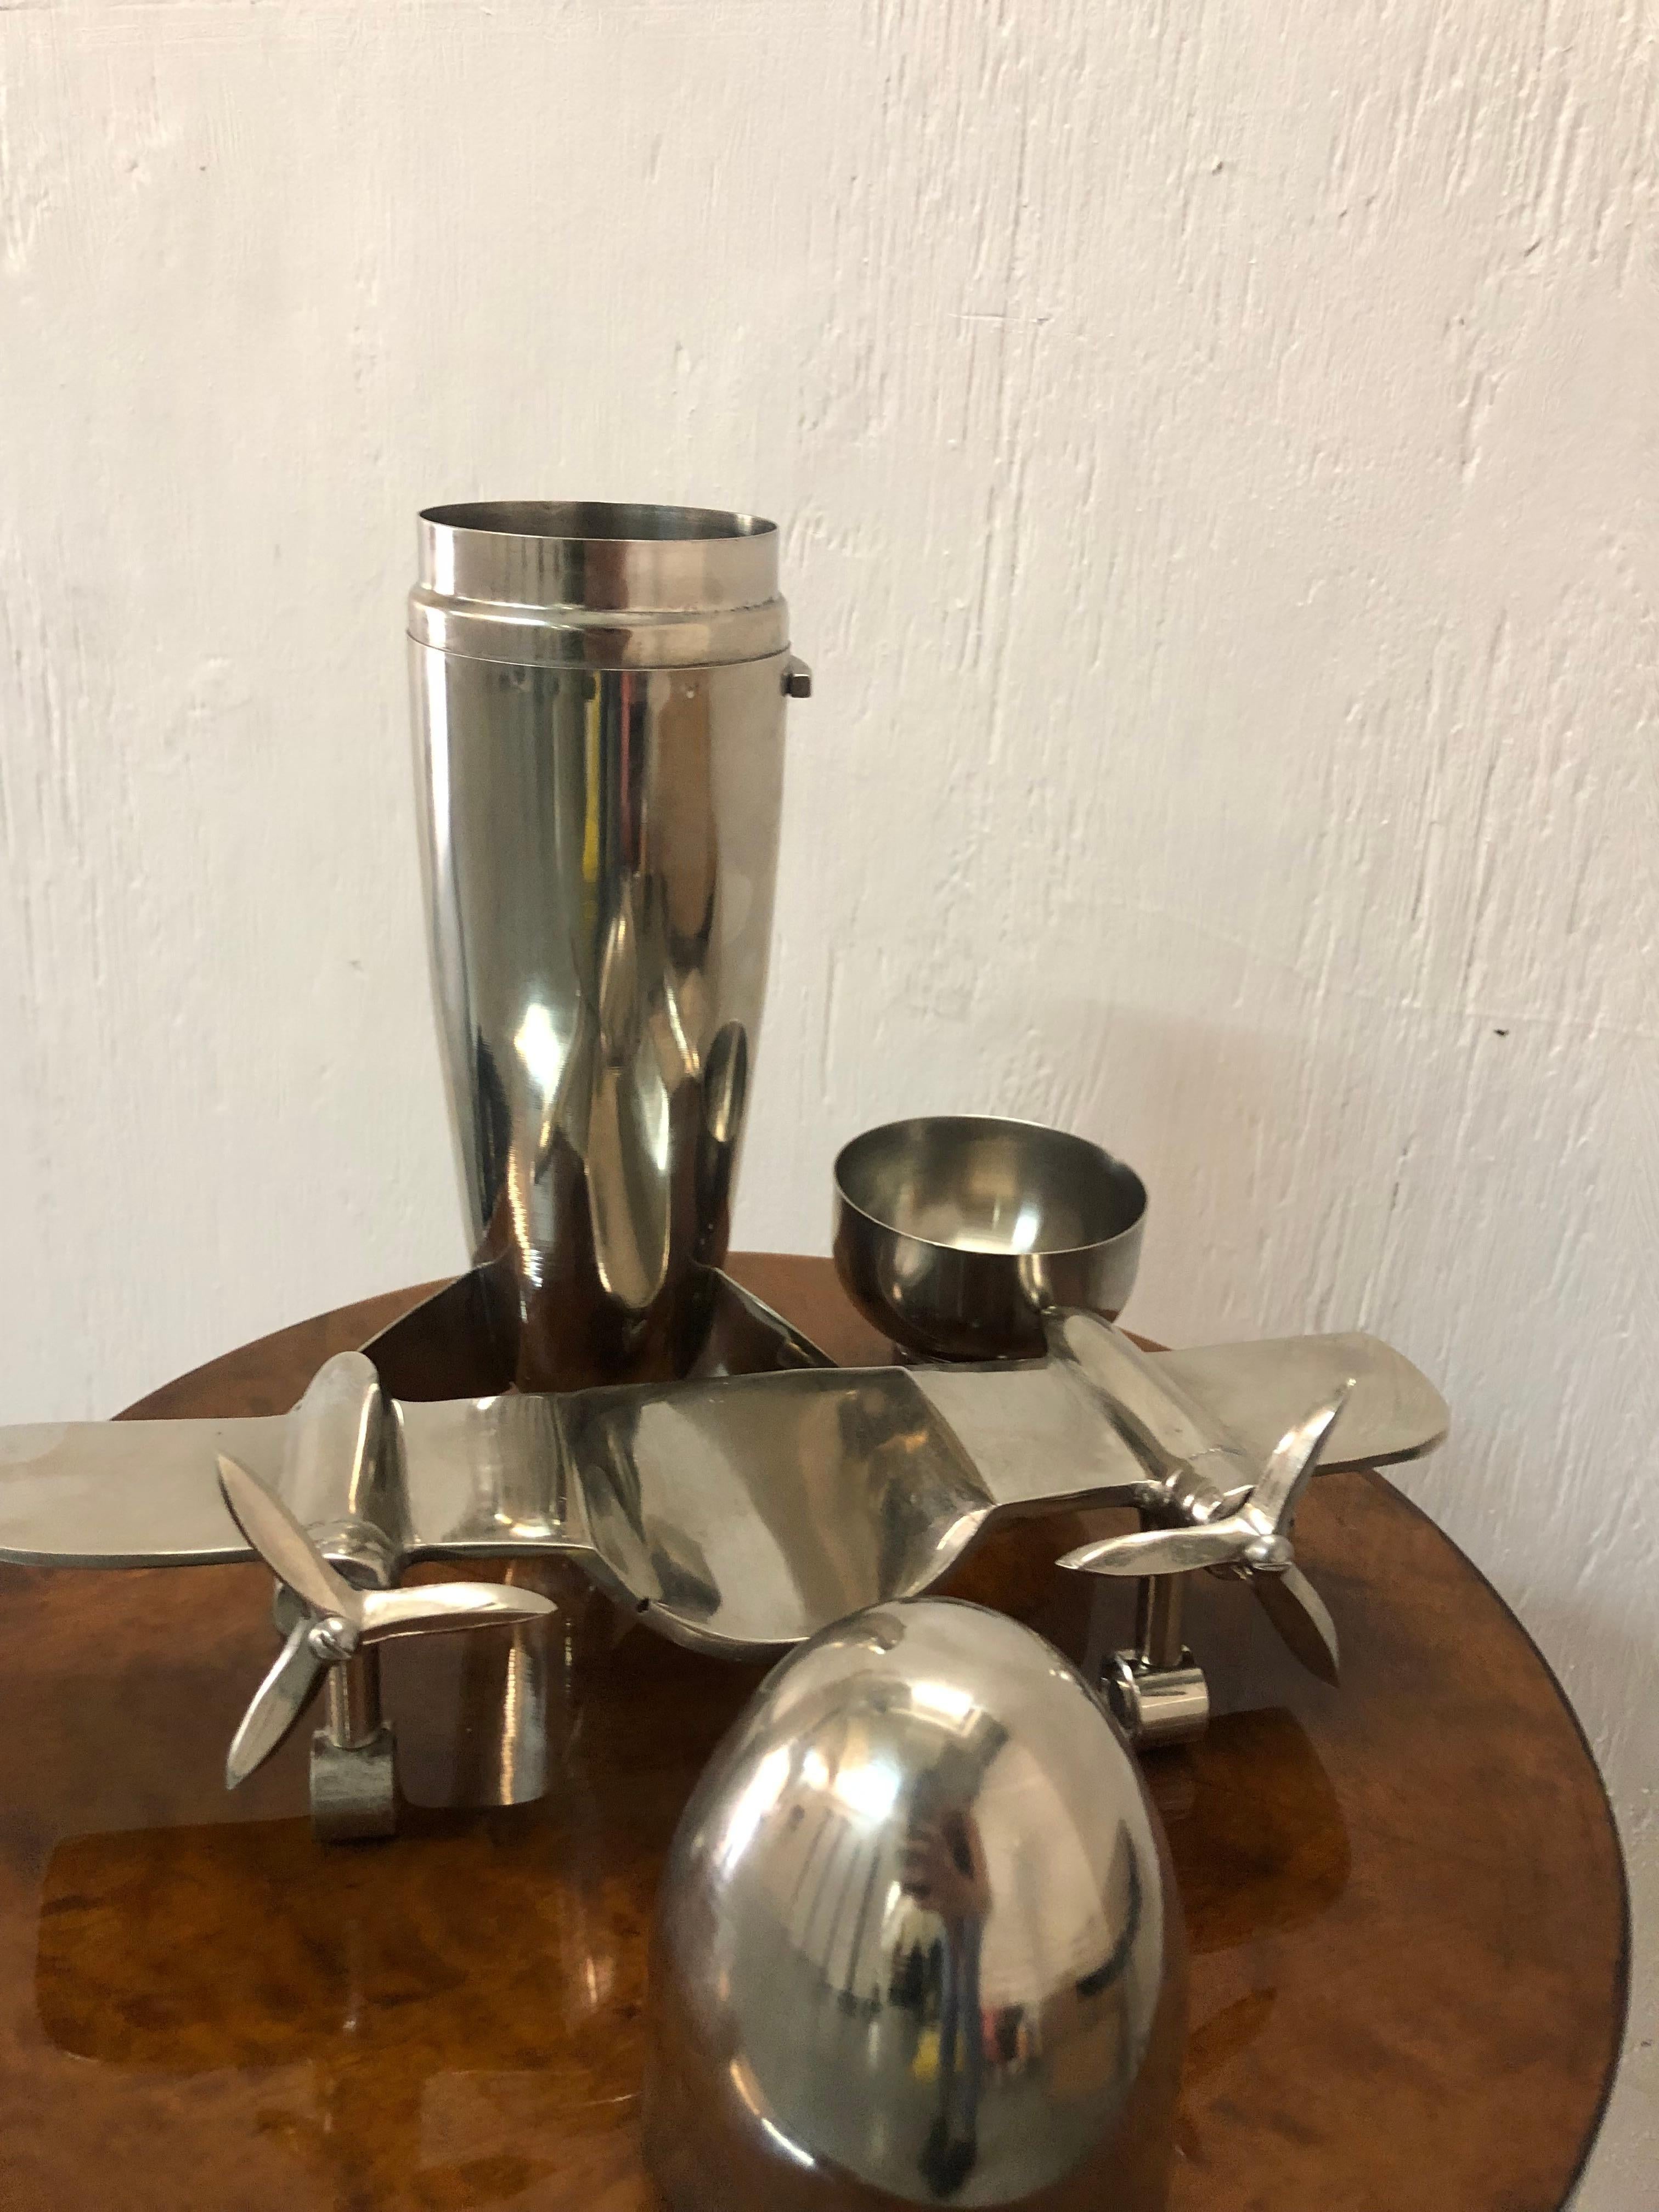 Airplane shaker
We have specialized in the sale of Art Deco and Art Nouveau styles since 1982.If you have any questions we are at your disposal.
Pushing the button that reads 'View All From Seller'. And you can see more objects to the style for